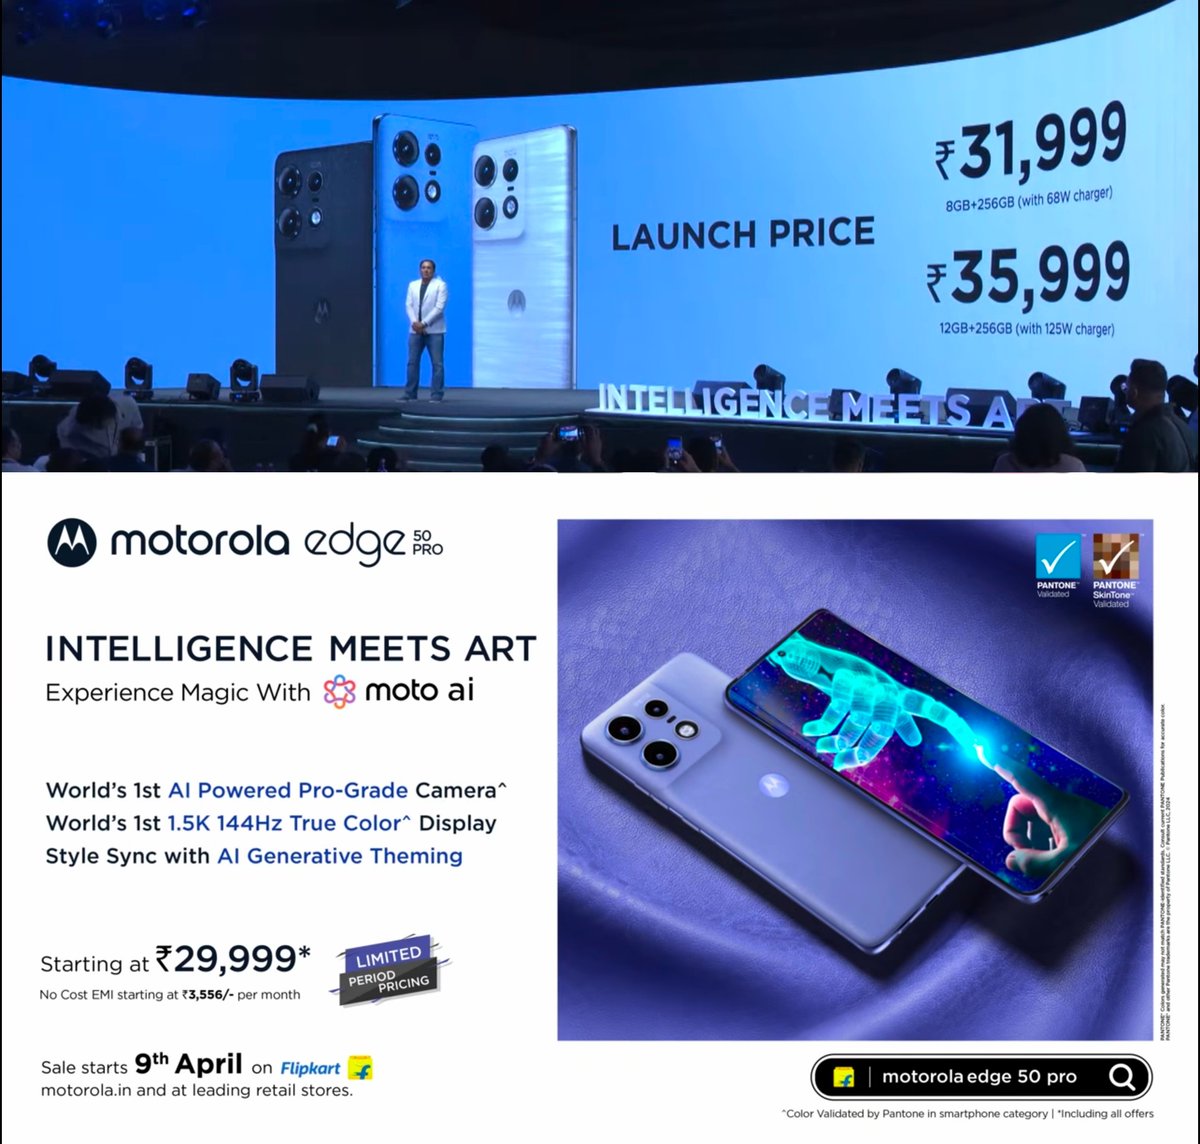 Motorola Edge 50 Pro launched in India.

Specifications
📱 6.7' 1.5K pOLED LTPS curved display 144Hz refresh rate, 2000nits peak brightness, 446 PPI 
🔳 Qualcomm Snapdragon 7 Gen 3
LPDDR4x RAM, UFS 2.2 storage
🍭 Android 14
📸 50MP main OIS+ 13MP Ultrawide+ 10MP telephoto 3x rear